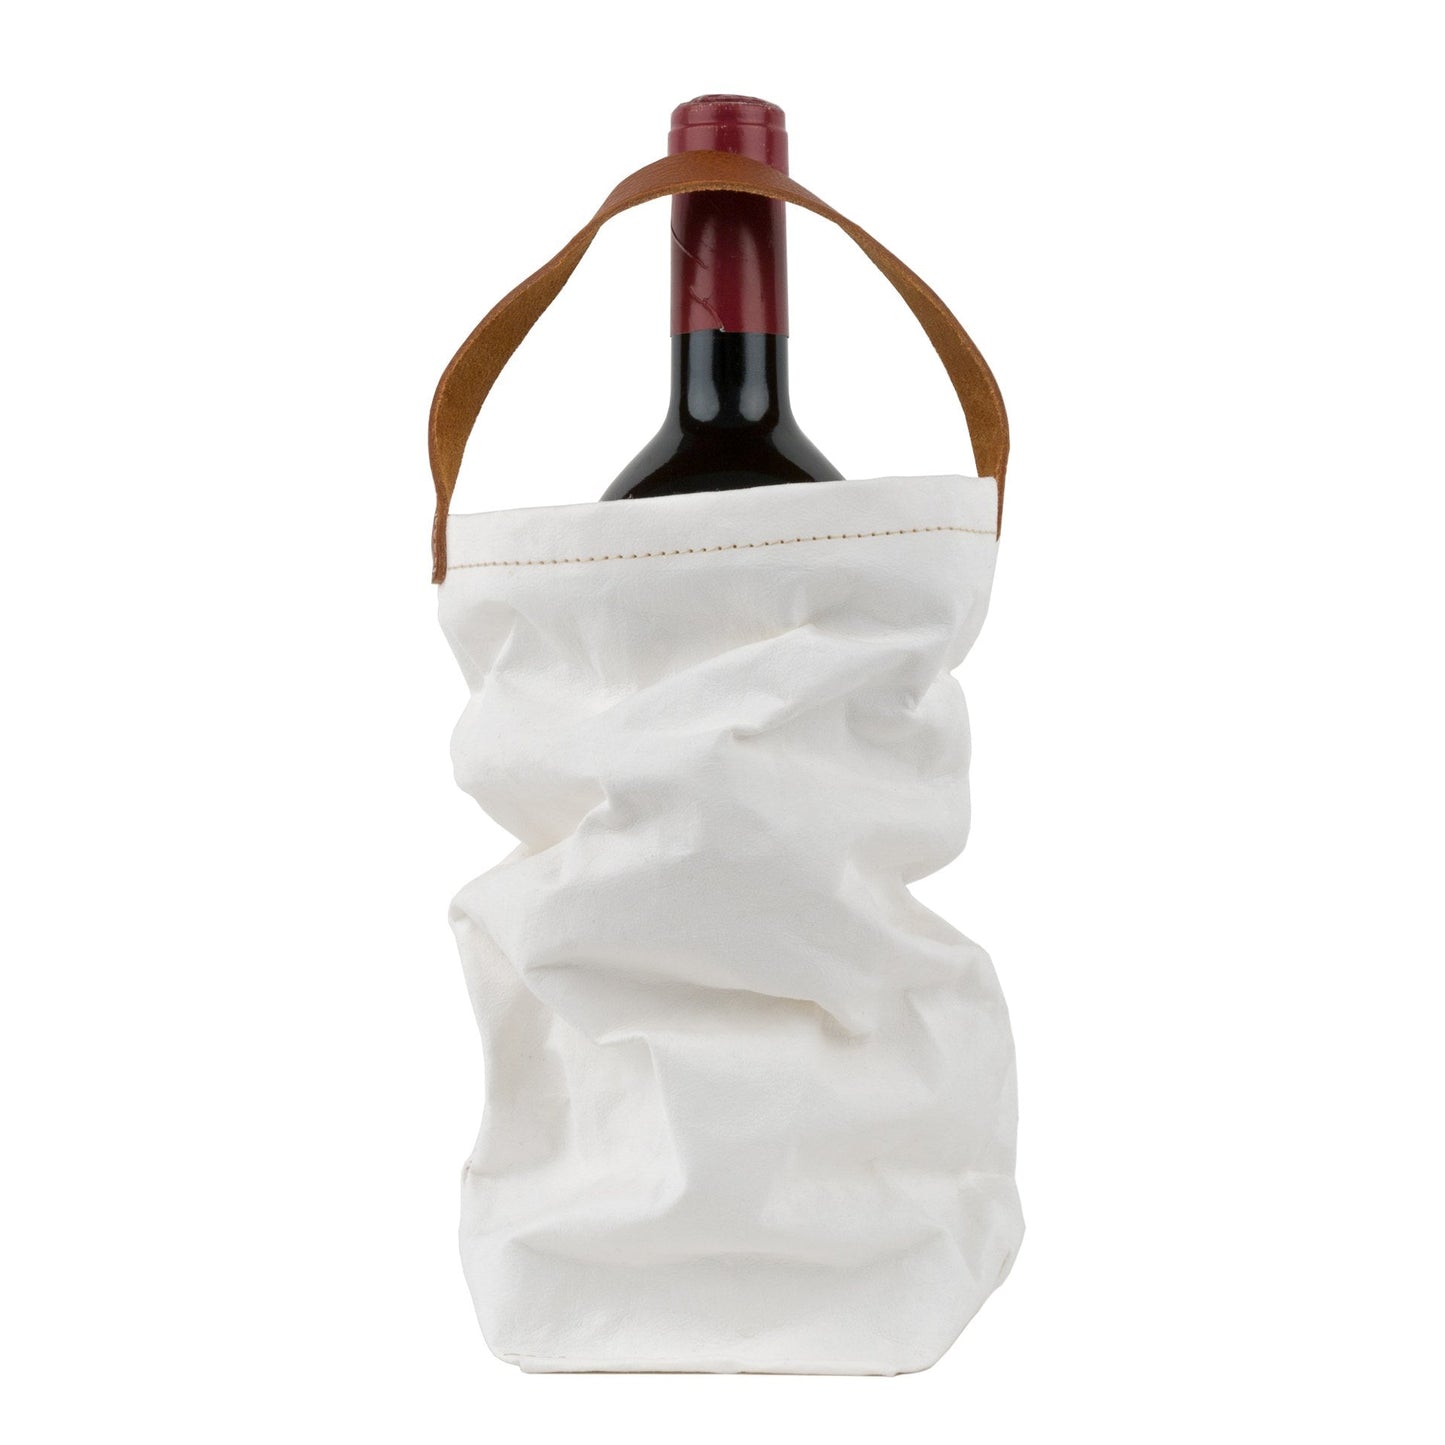 A red wine bottle is shown inside a washable paper wine bag. The bag has a small brown leather handle at the top for carrying. The washable paper wine bag shown is white.